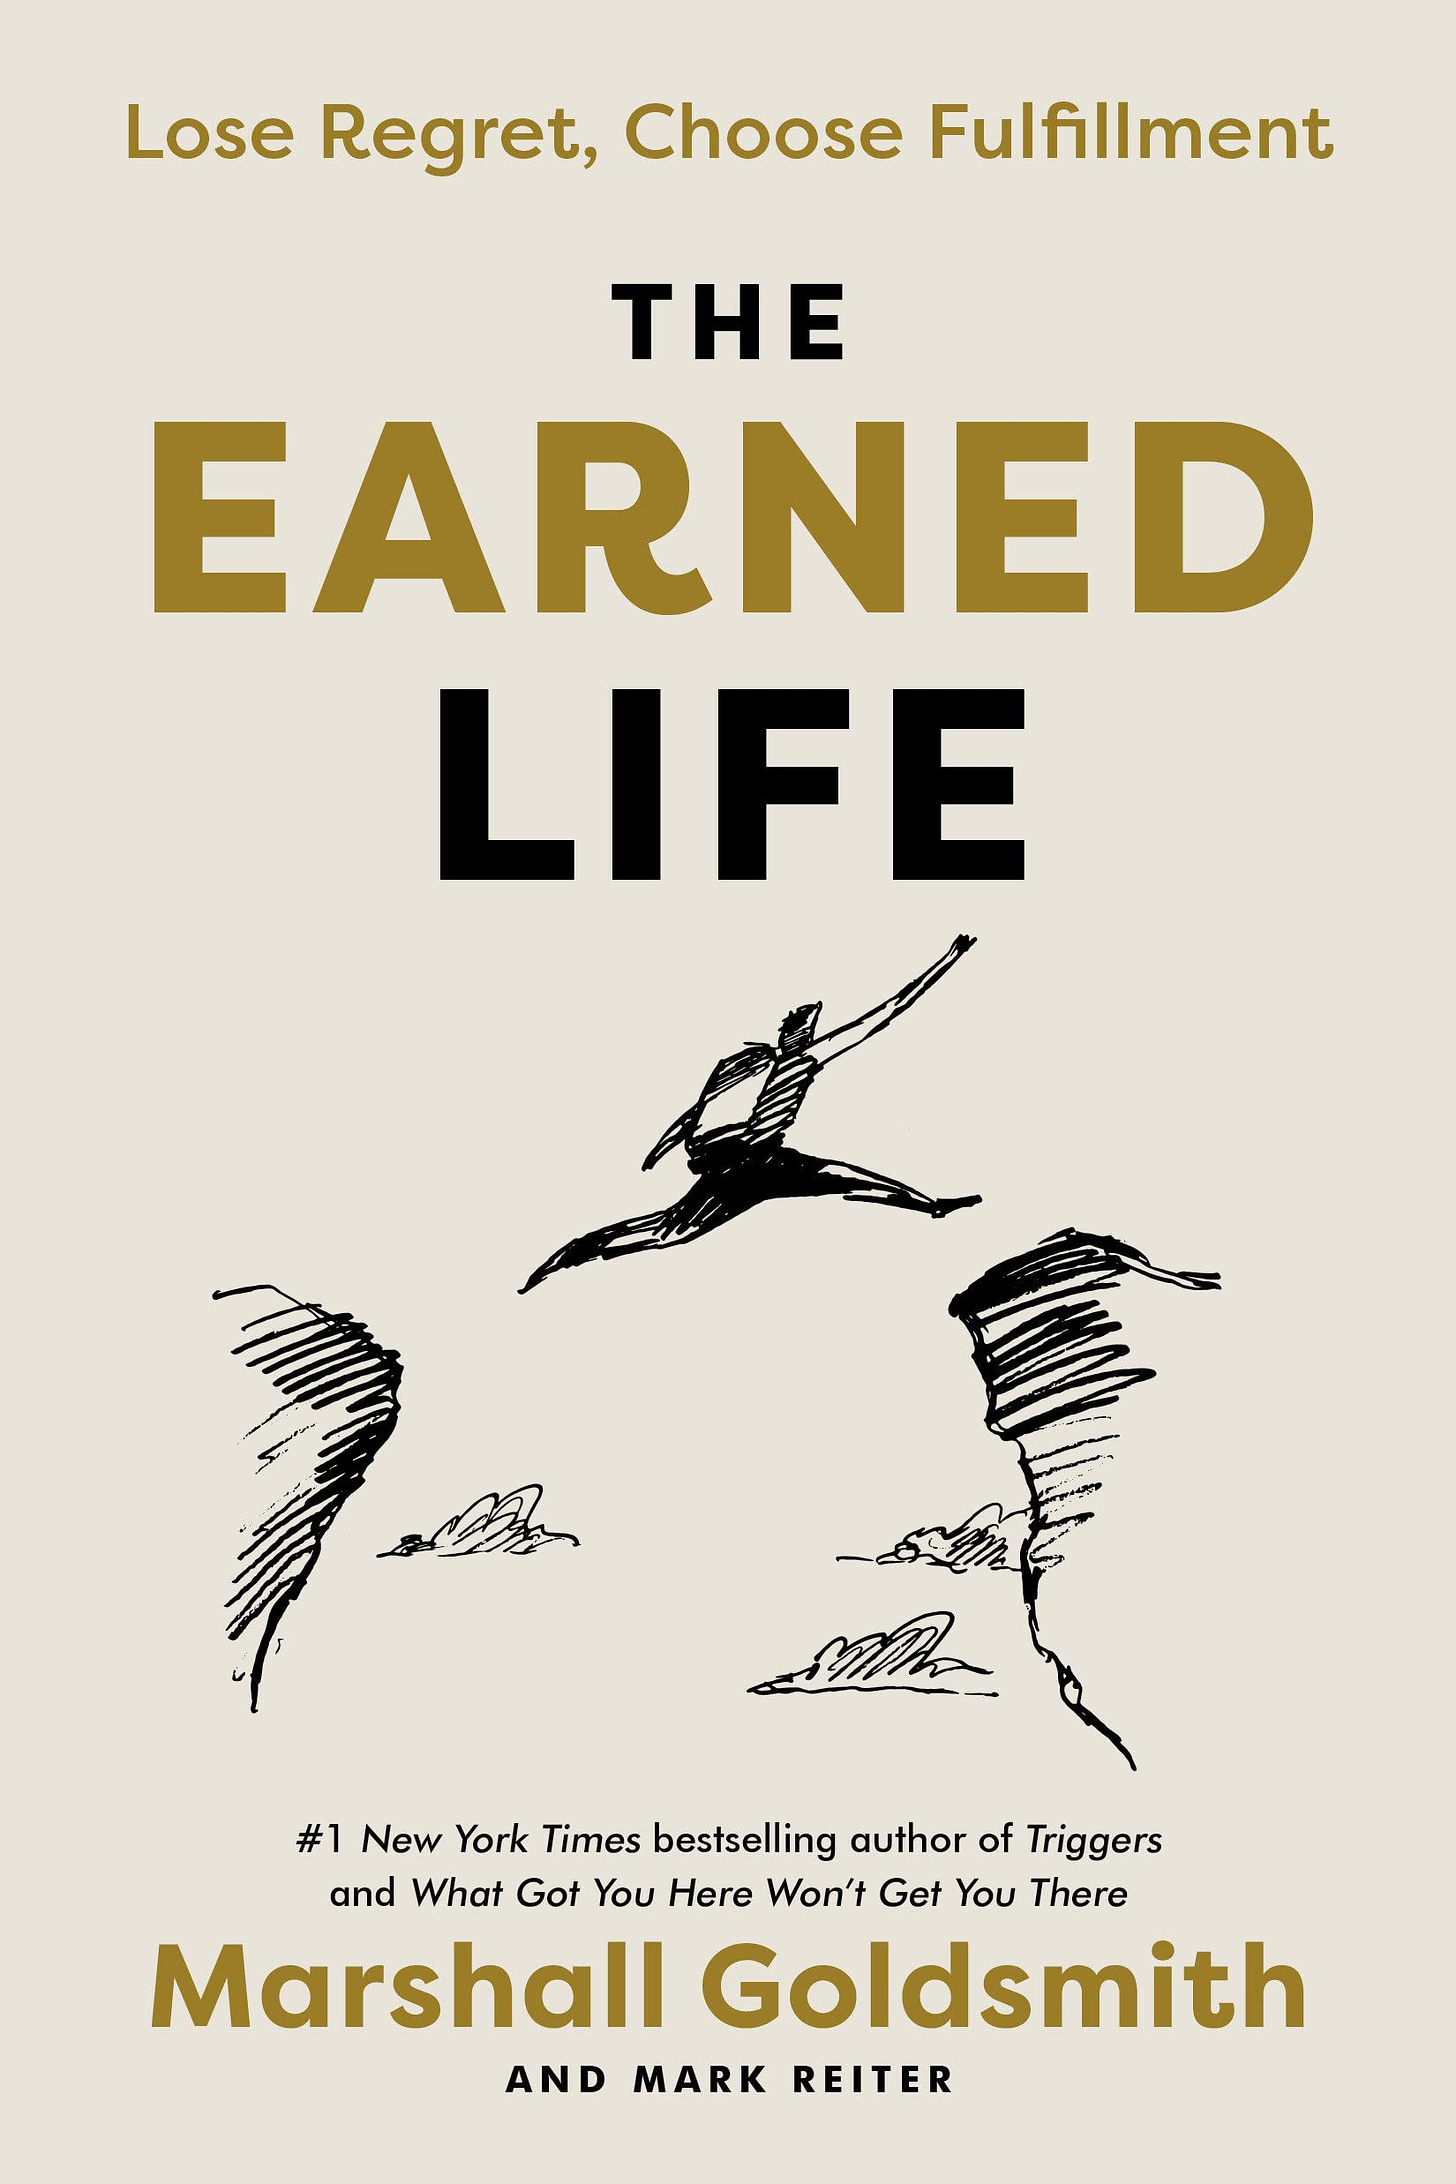 The Earned Life: Lose Regret, Choose Fulfillment : Goldsmith, Marshall,  Reiter, Mark: Amazon.in: Books